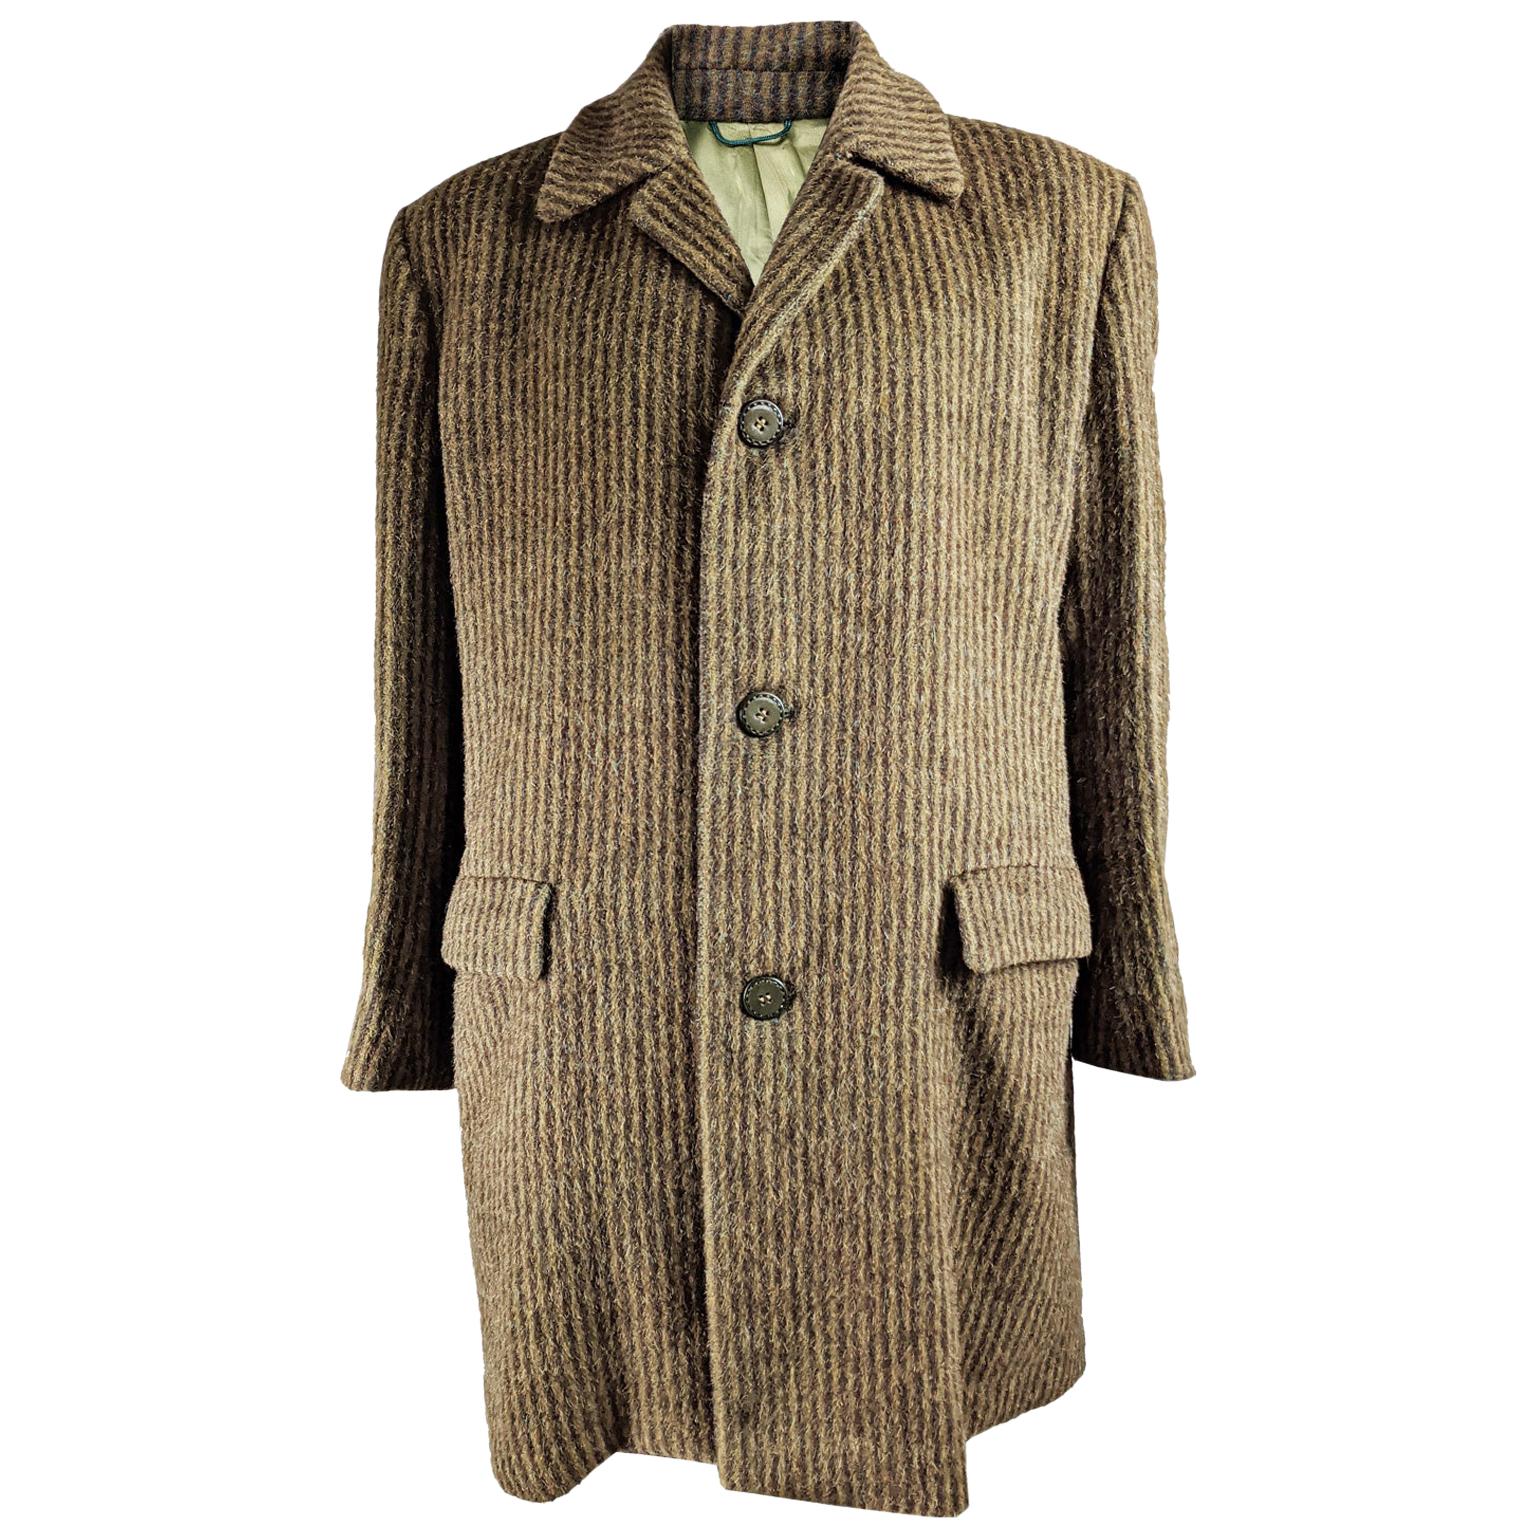 Hardy Amies Mens Cashmere & Wool Vintage Striped Coat